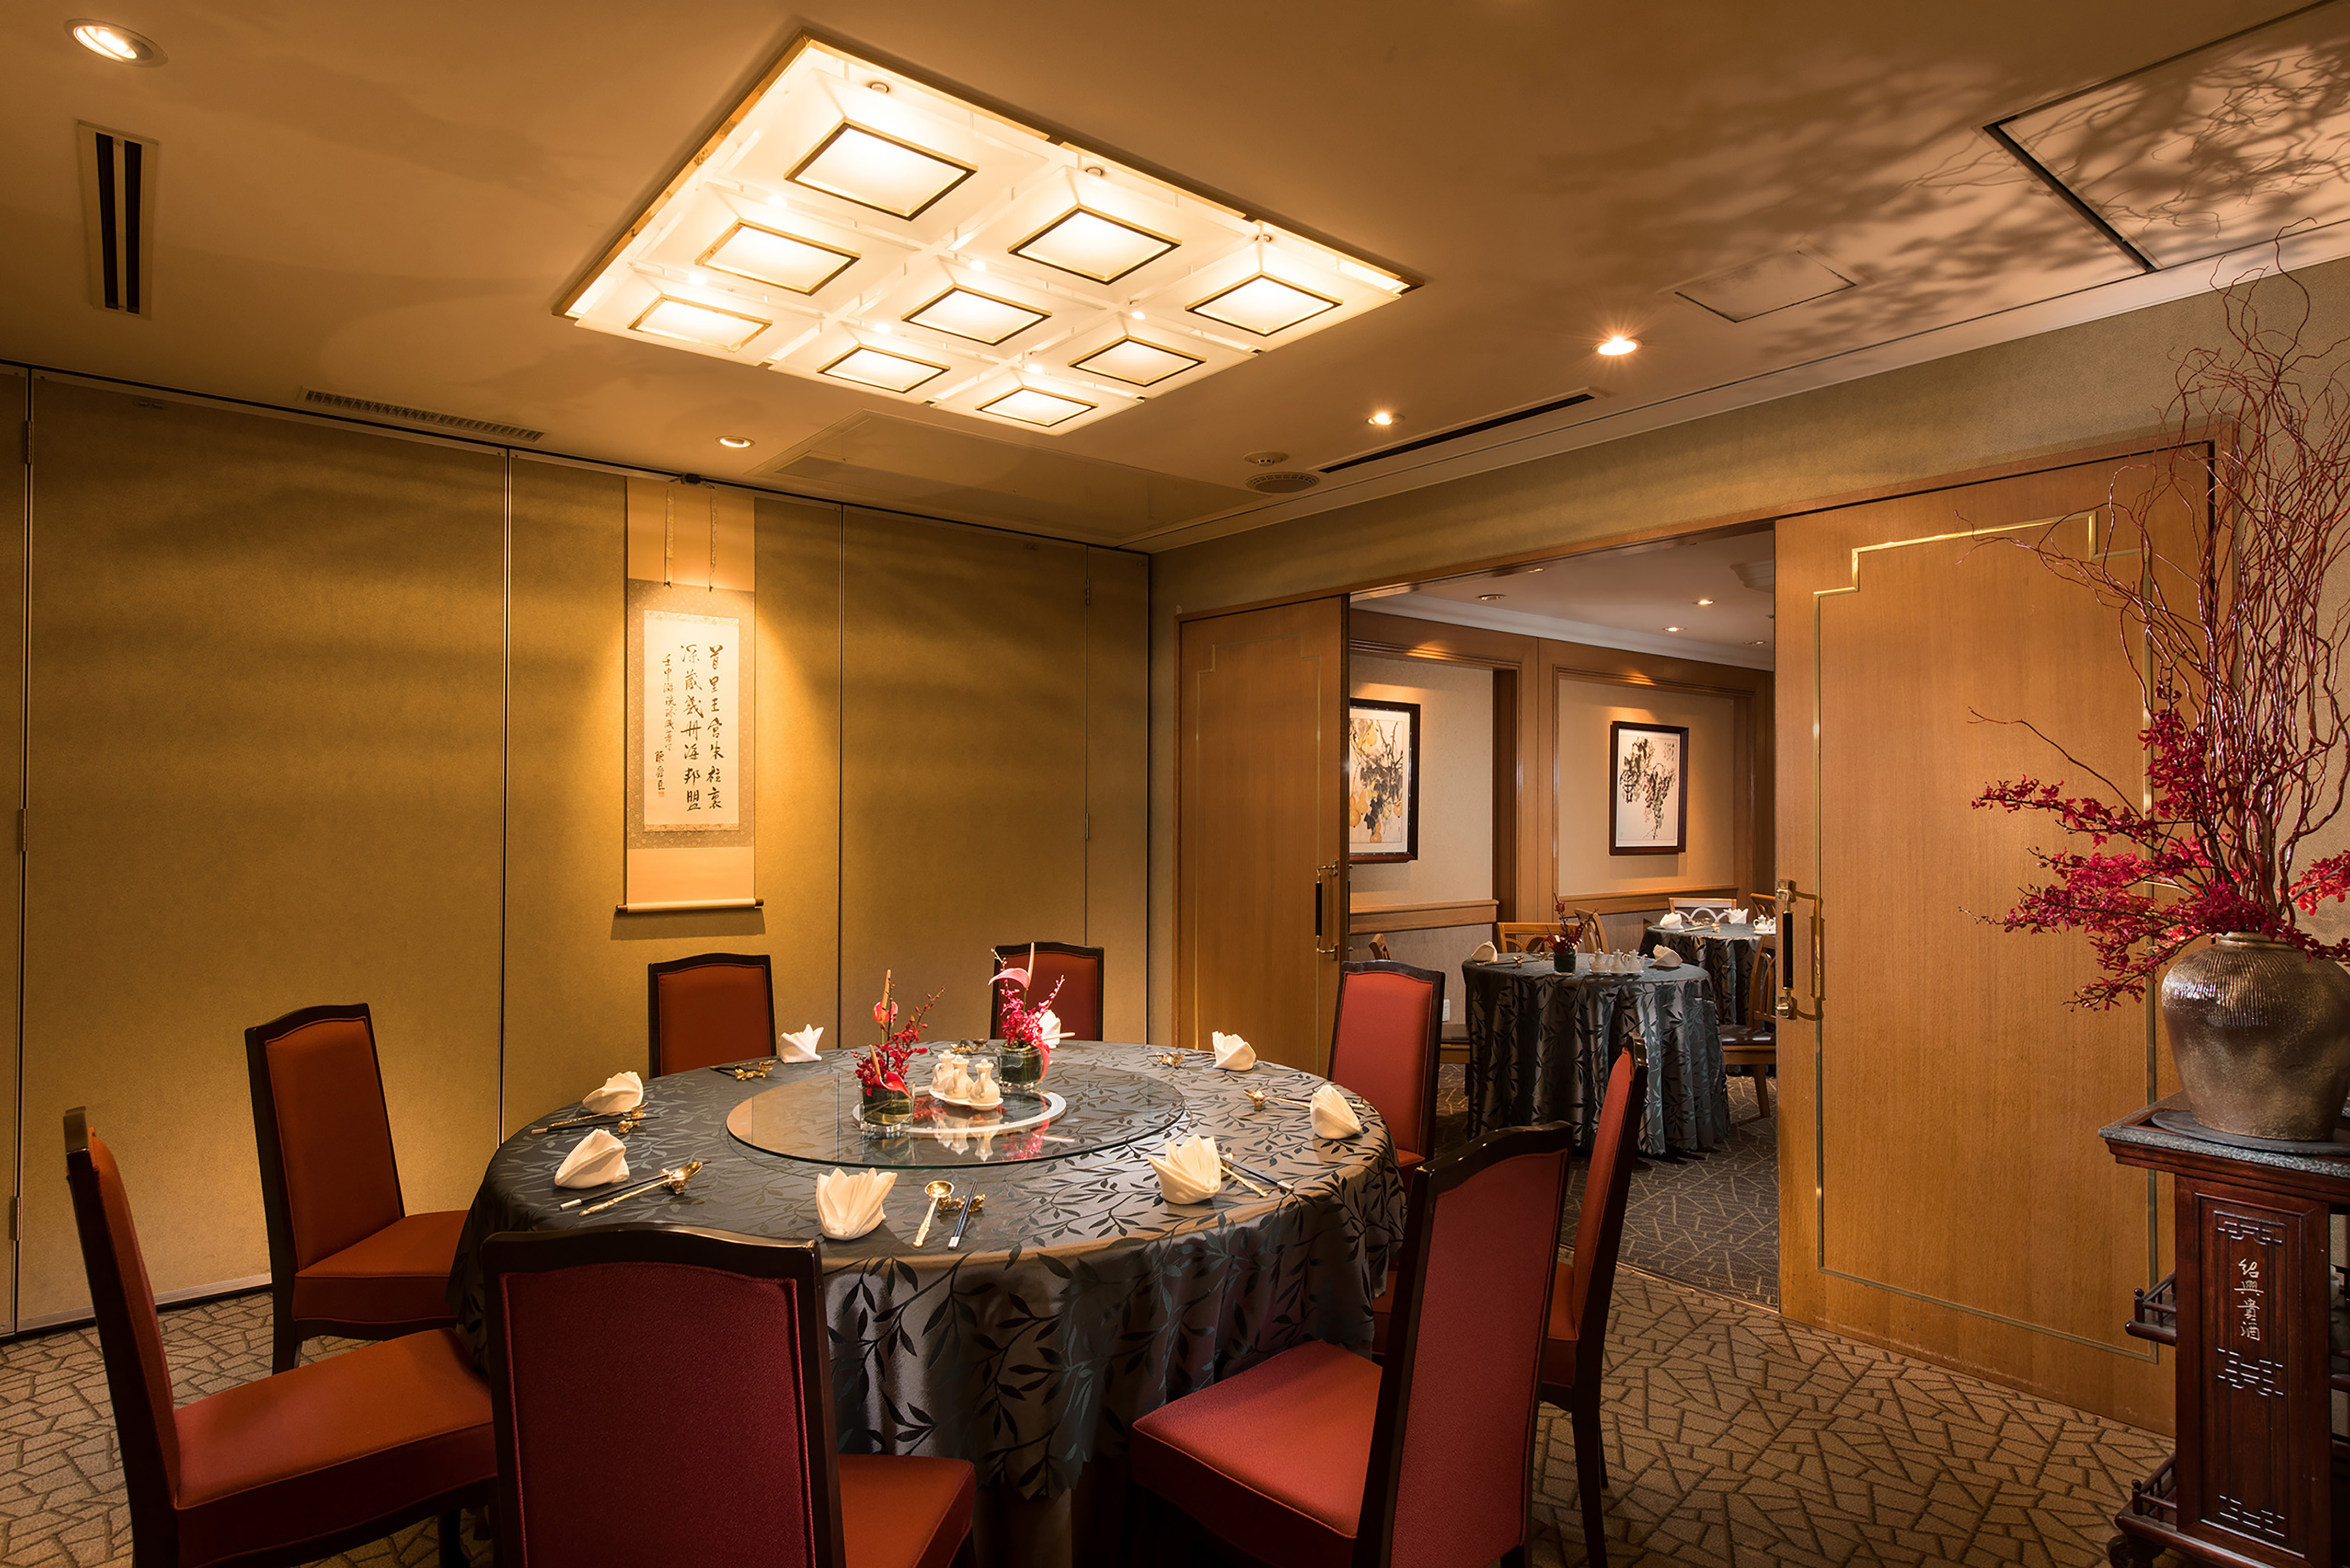 Private Dining Room With Flowers, Folded Napkins and Decorative Linens on Tables, Seating for 8, Wall Art and Open Doorway in Shunten Chinese Restaurant